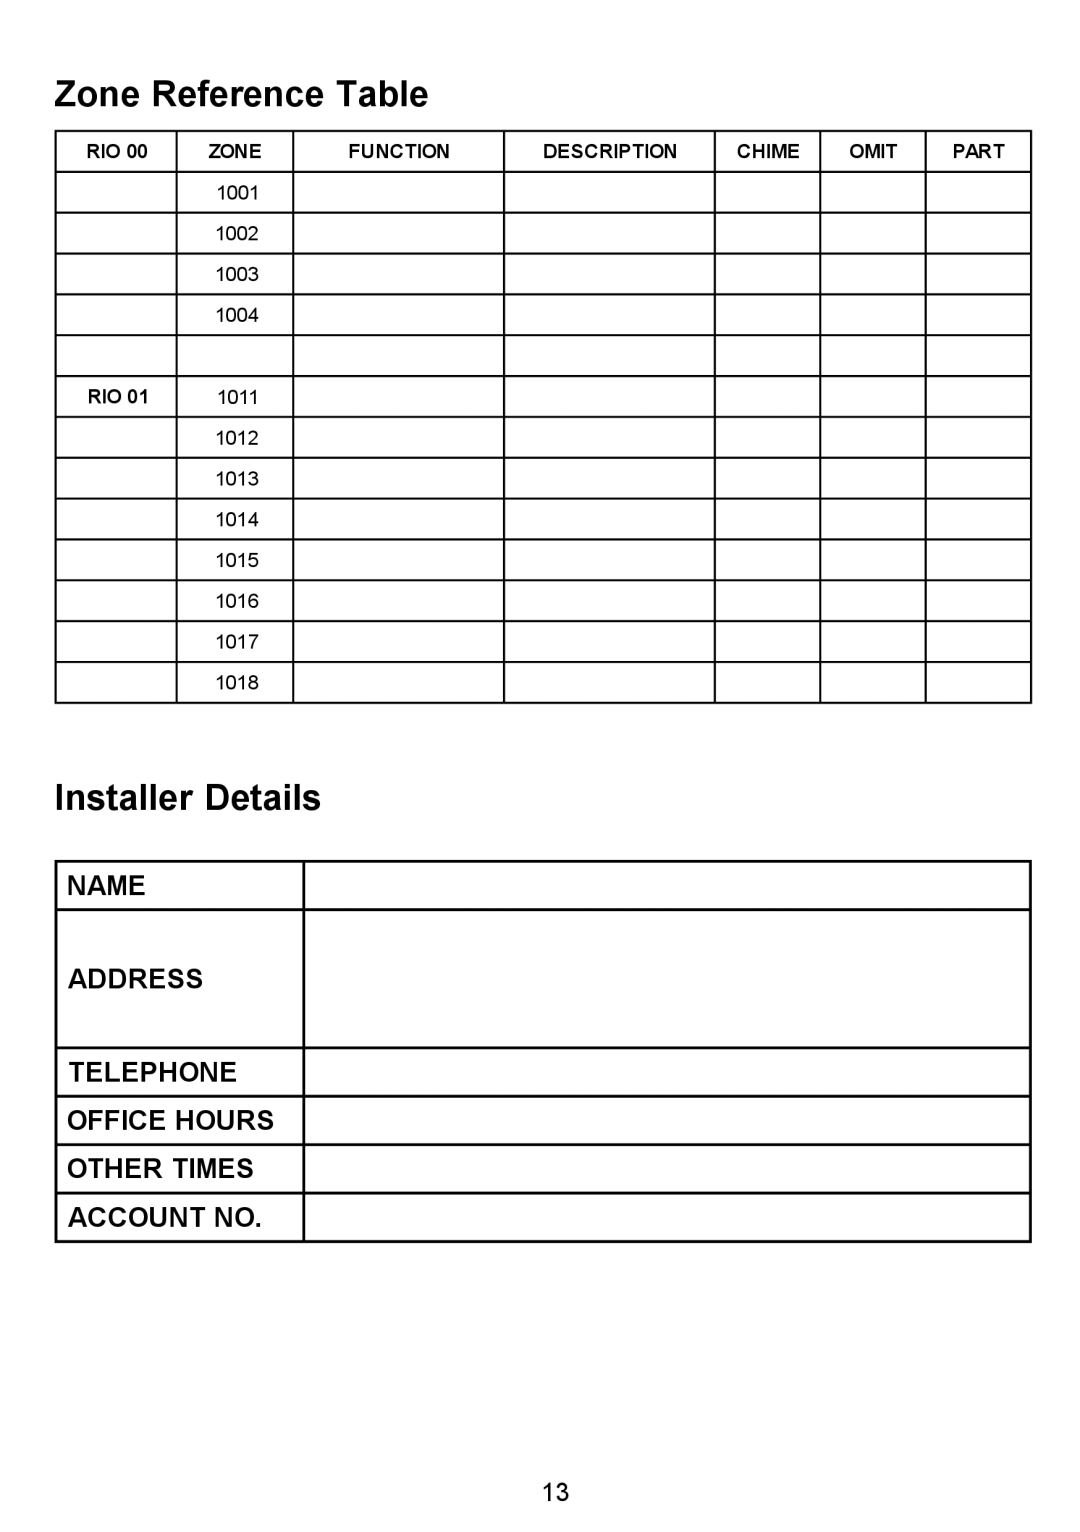 Honeywell 16103 Zone Reference Table, Installer Details, Name Address Telephone Office Hours Other Times, Account No, Omit 